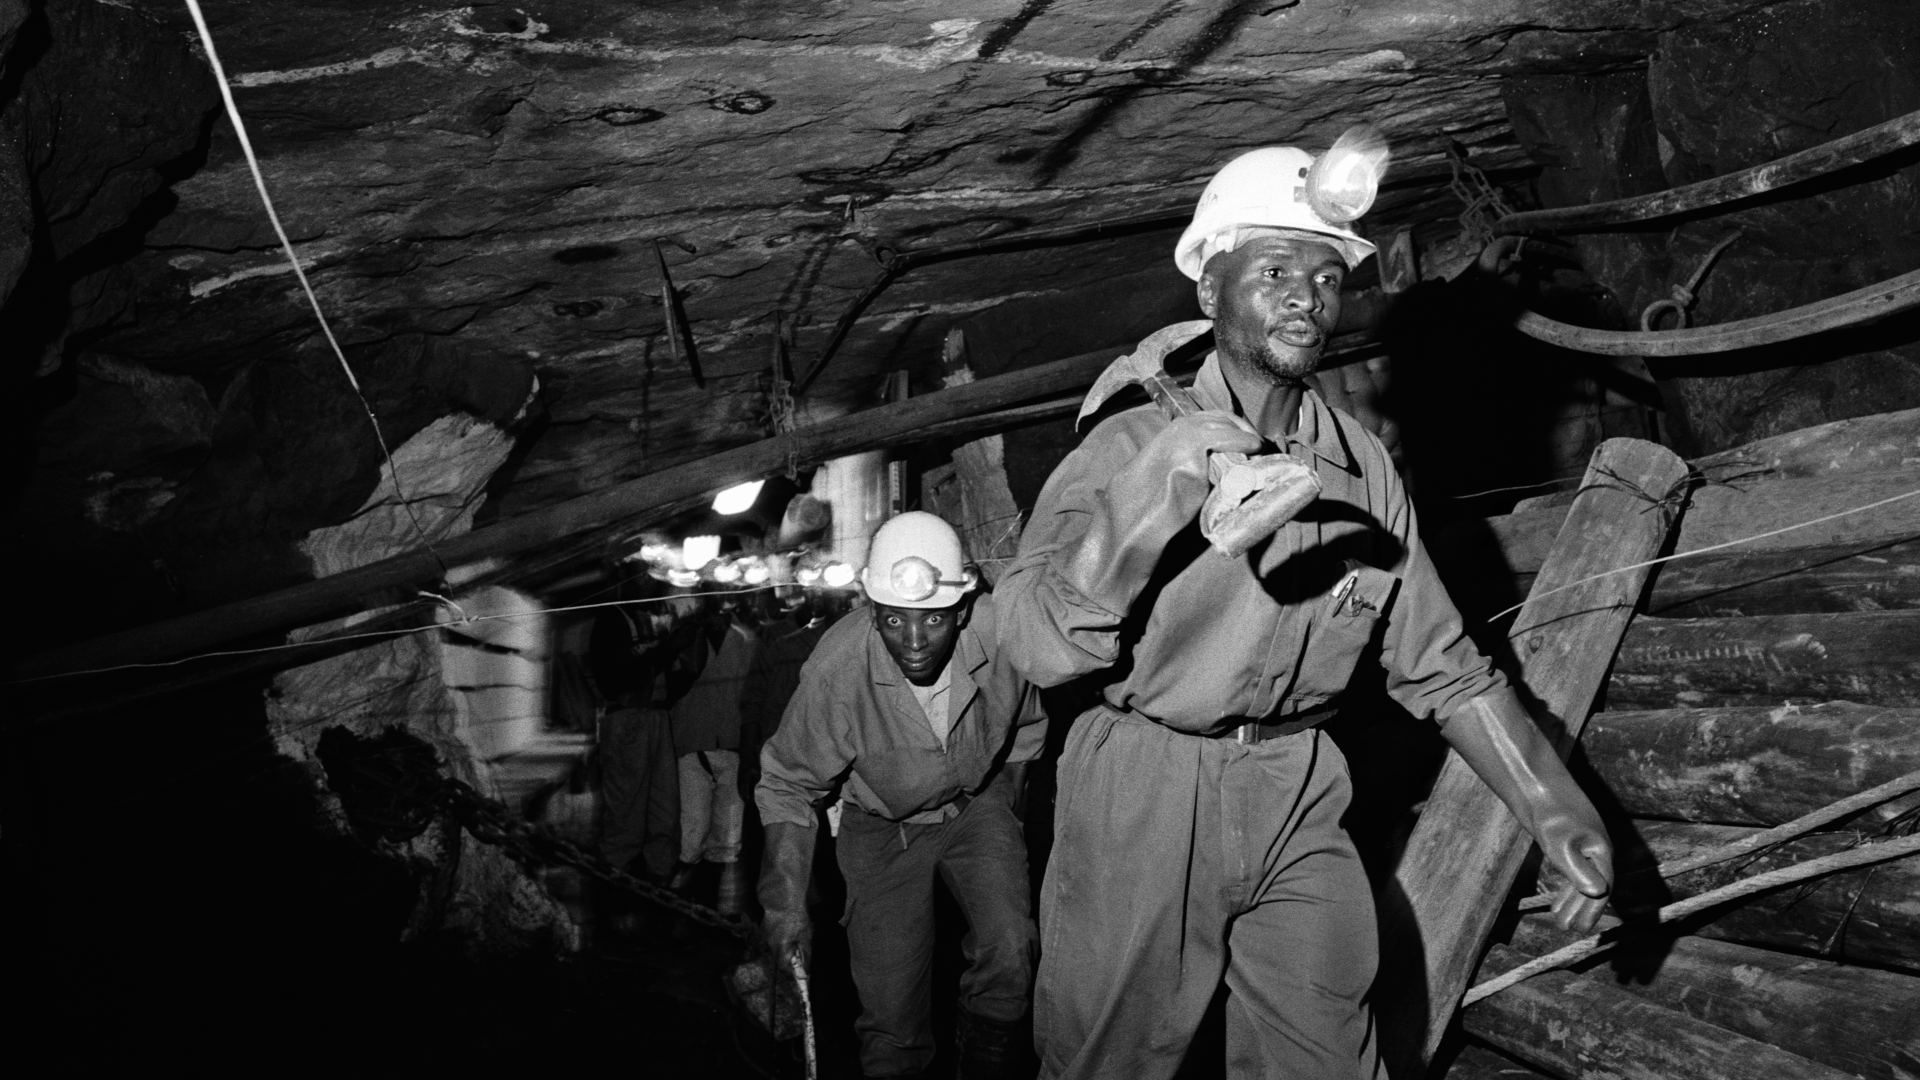 Miners working for the Lonmin Platinum company in South Africa walk along an underground tunnel in the early 2000s.